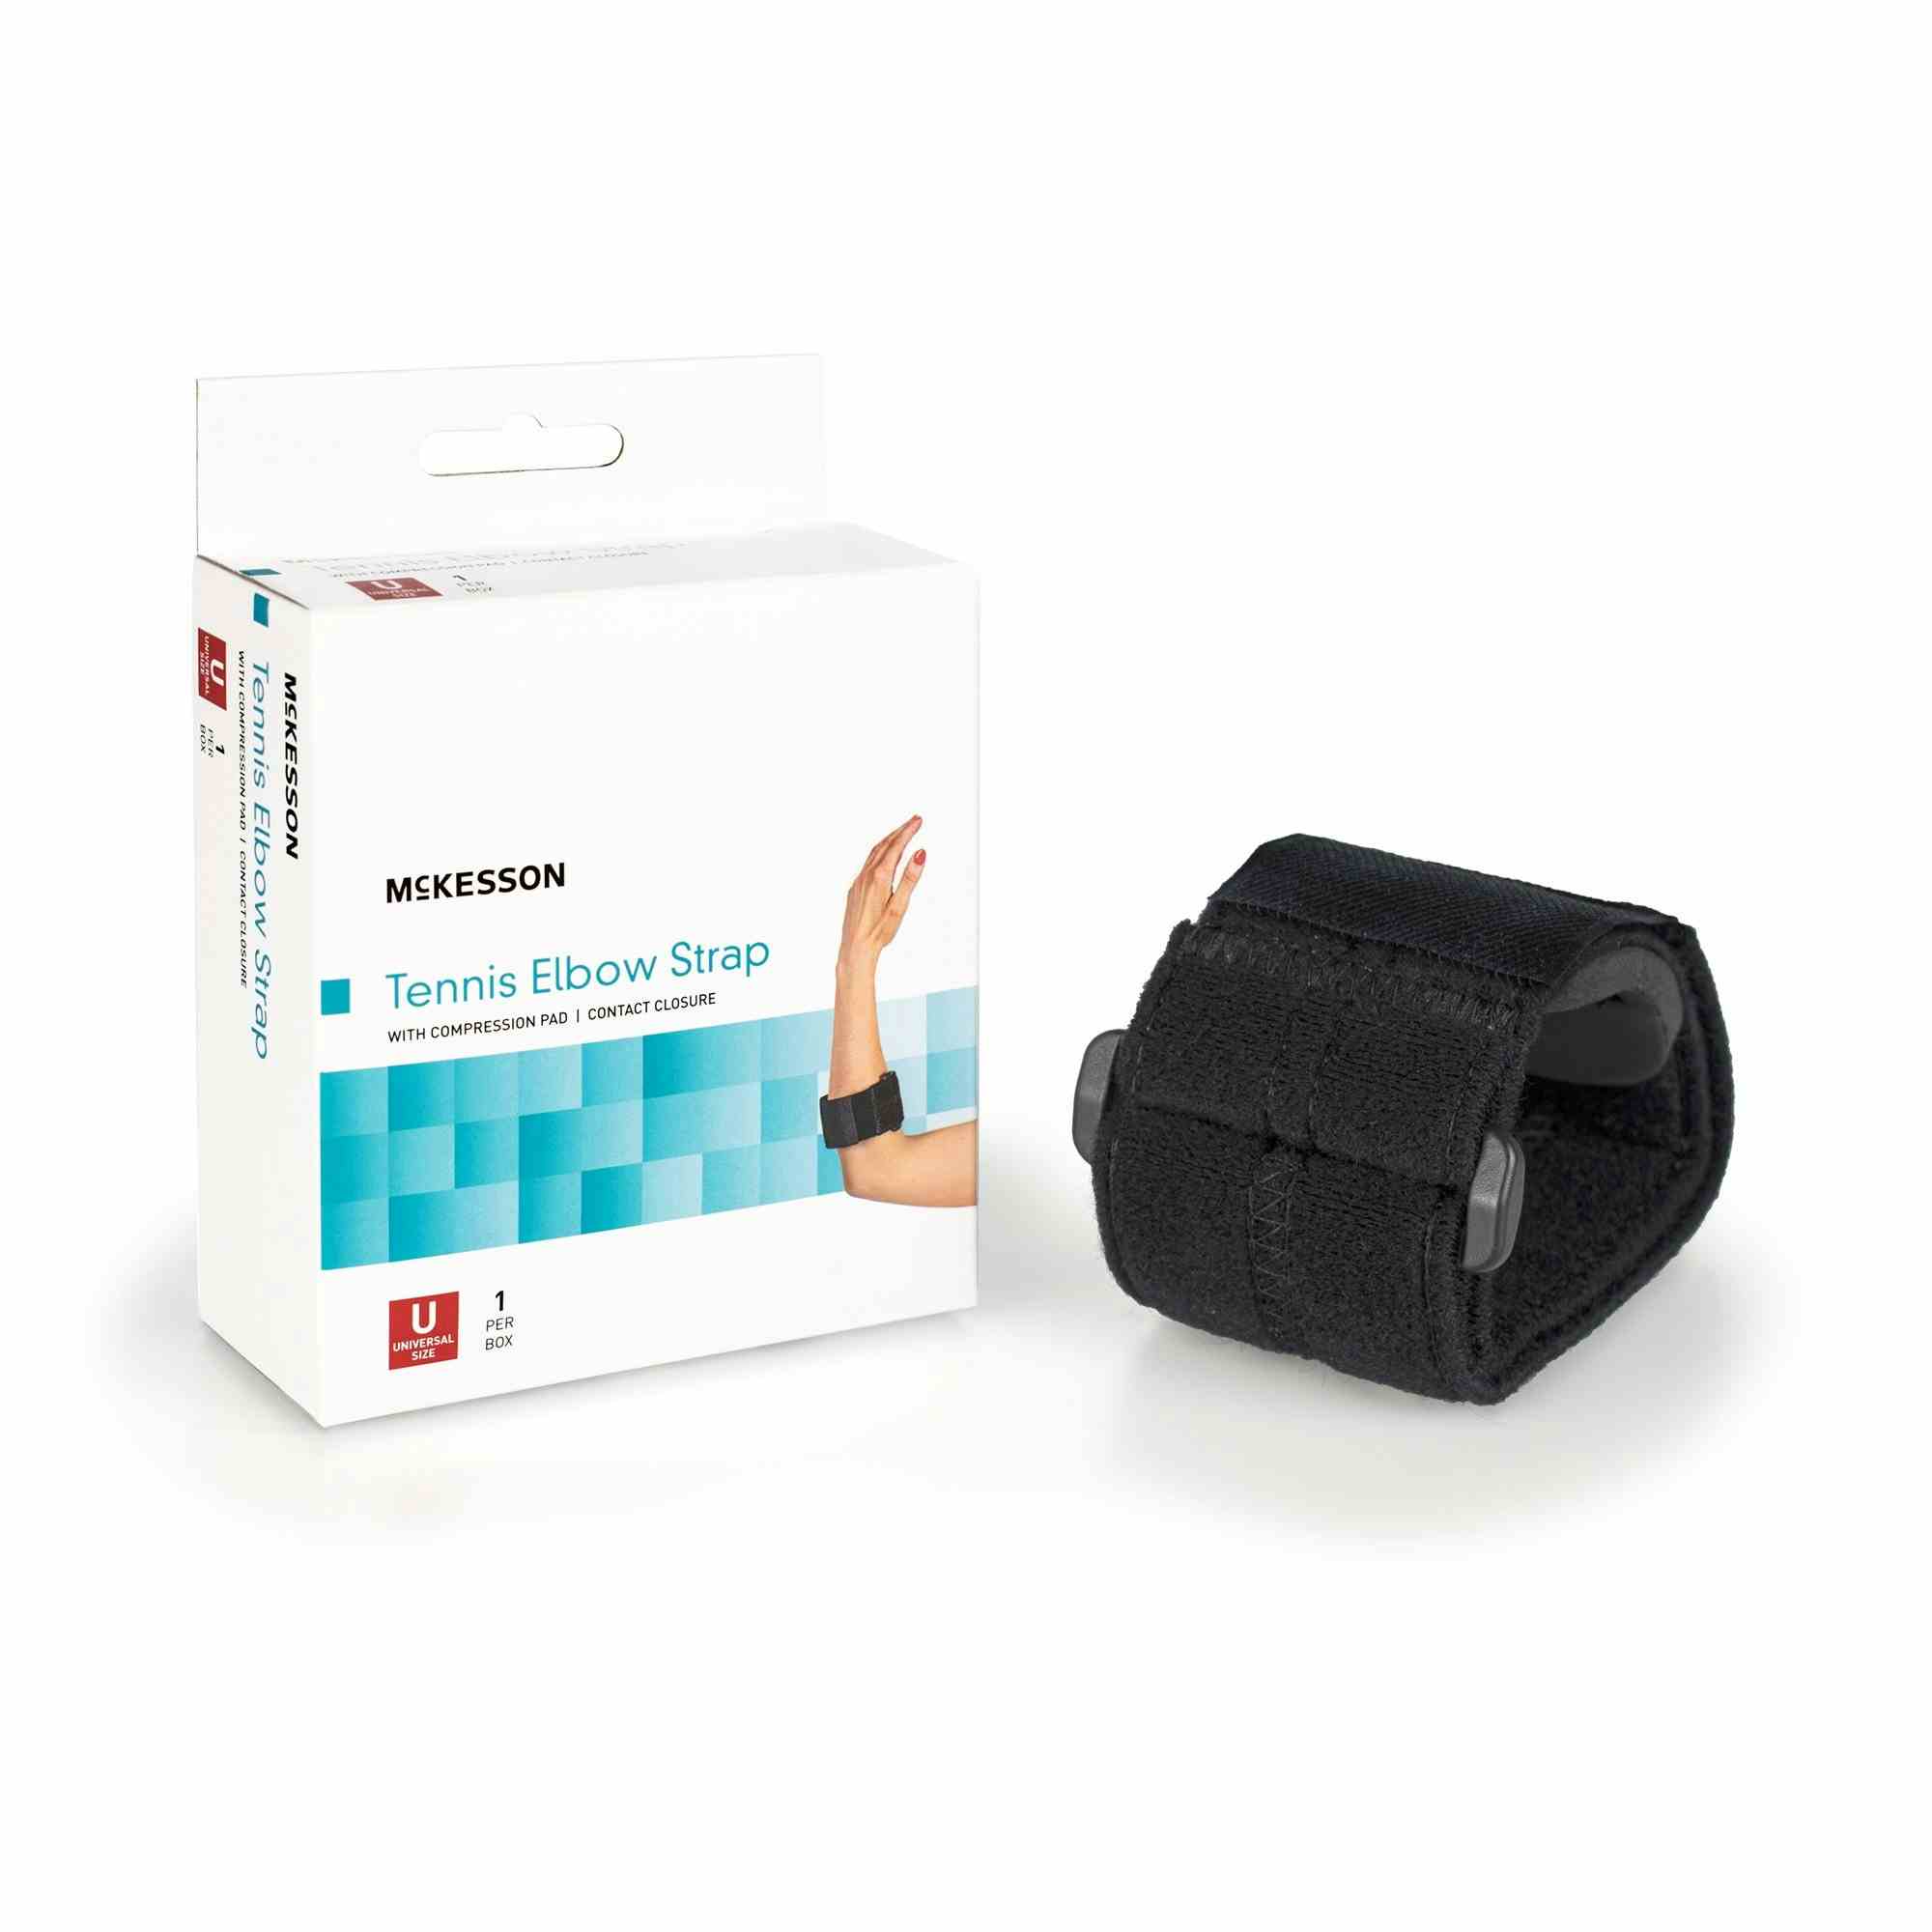 McKesson Tennis Elbow Strap with Compression Pad, 155-BH-194, 1 Each